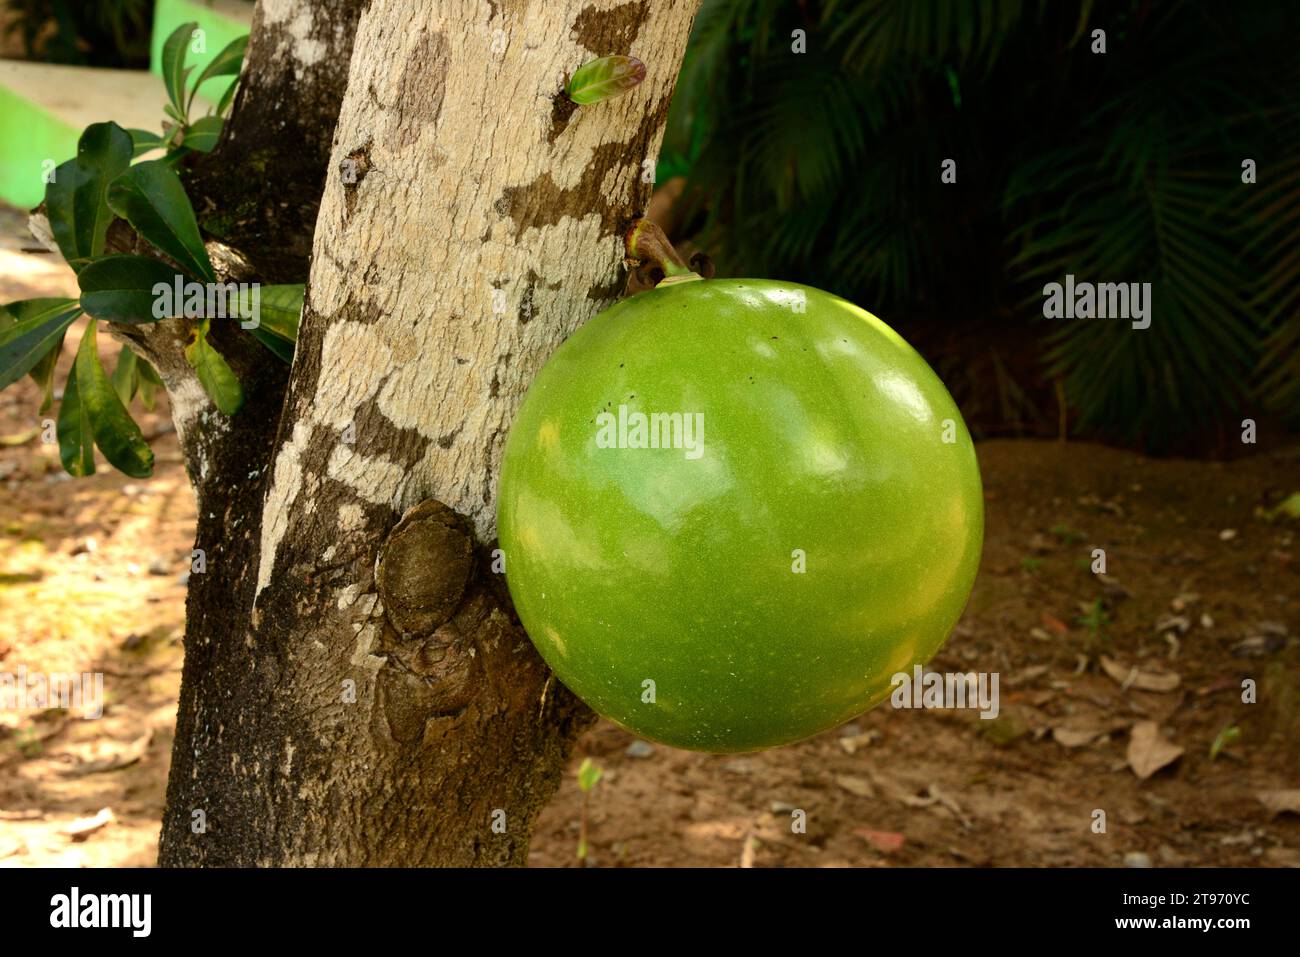 Calabash tree or cuite (Crescentia cujete) is a tree that produce very big fruits calleds bule, guaje, jicara or tecomate. The fruit is used to make c Stock Photo